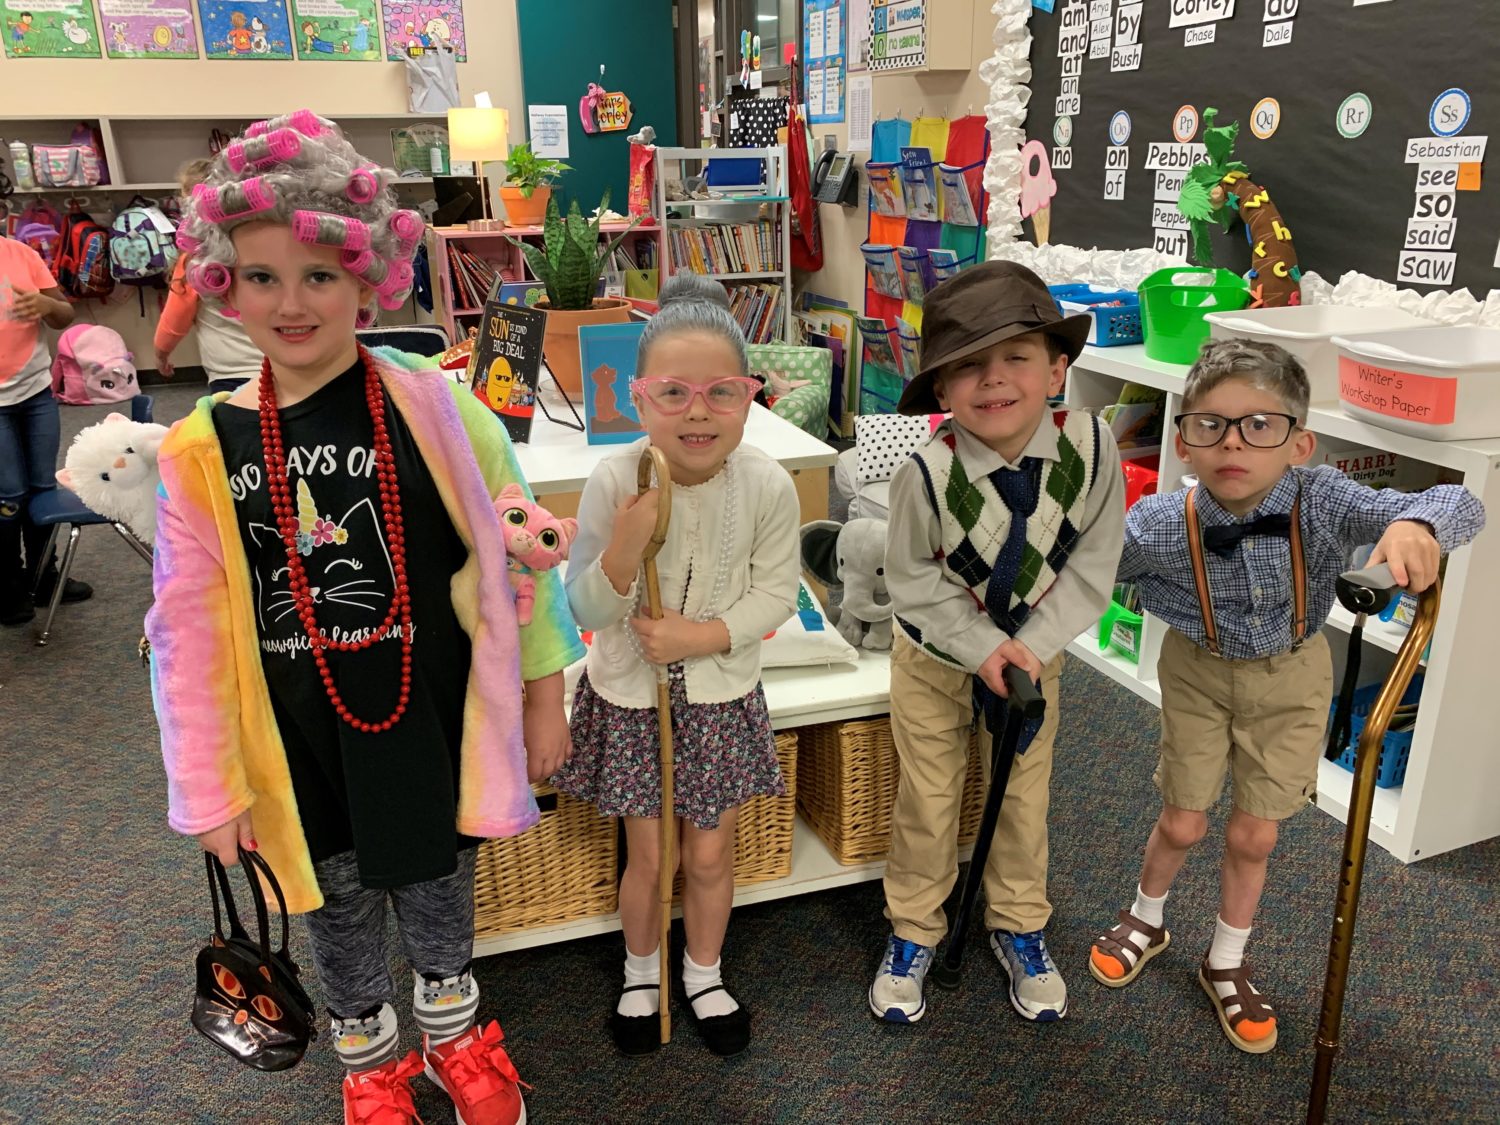 "four students dress like old people to celebrate 100 days of school"